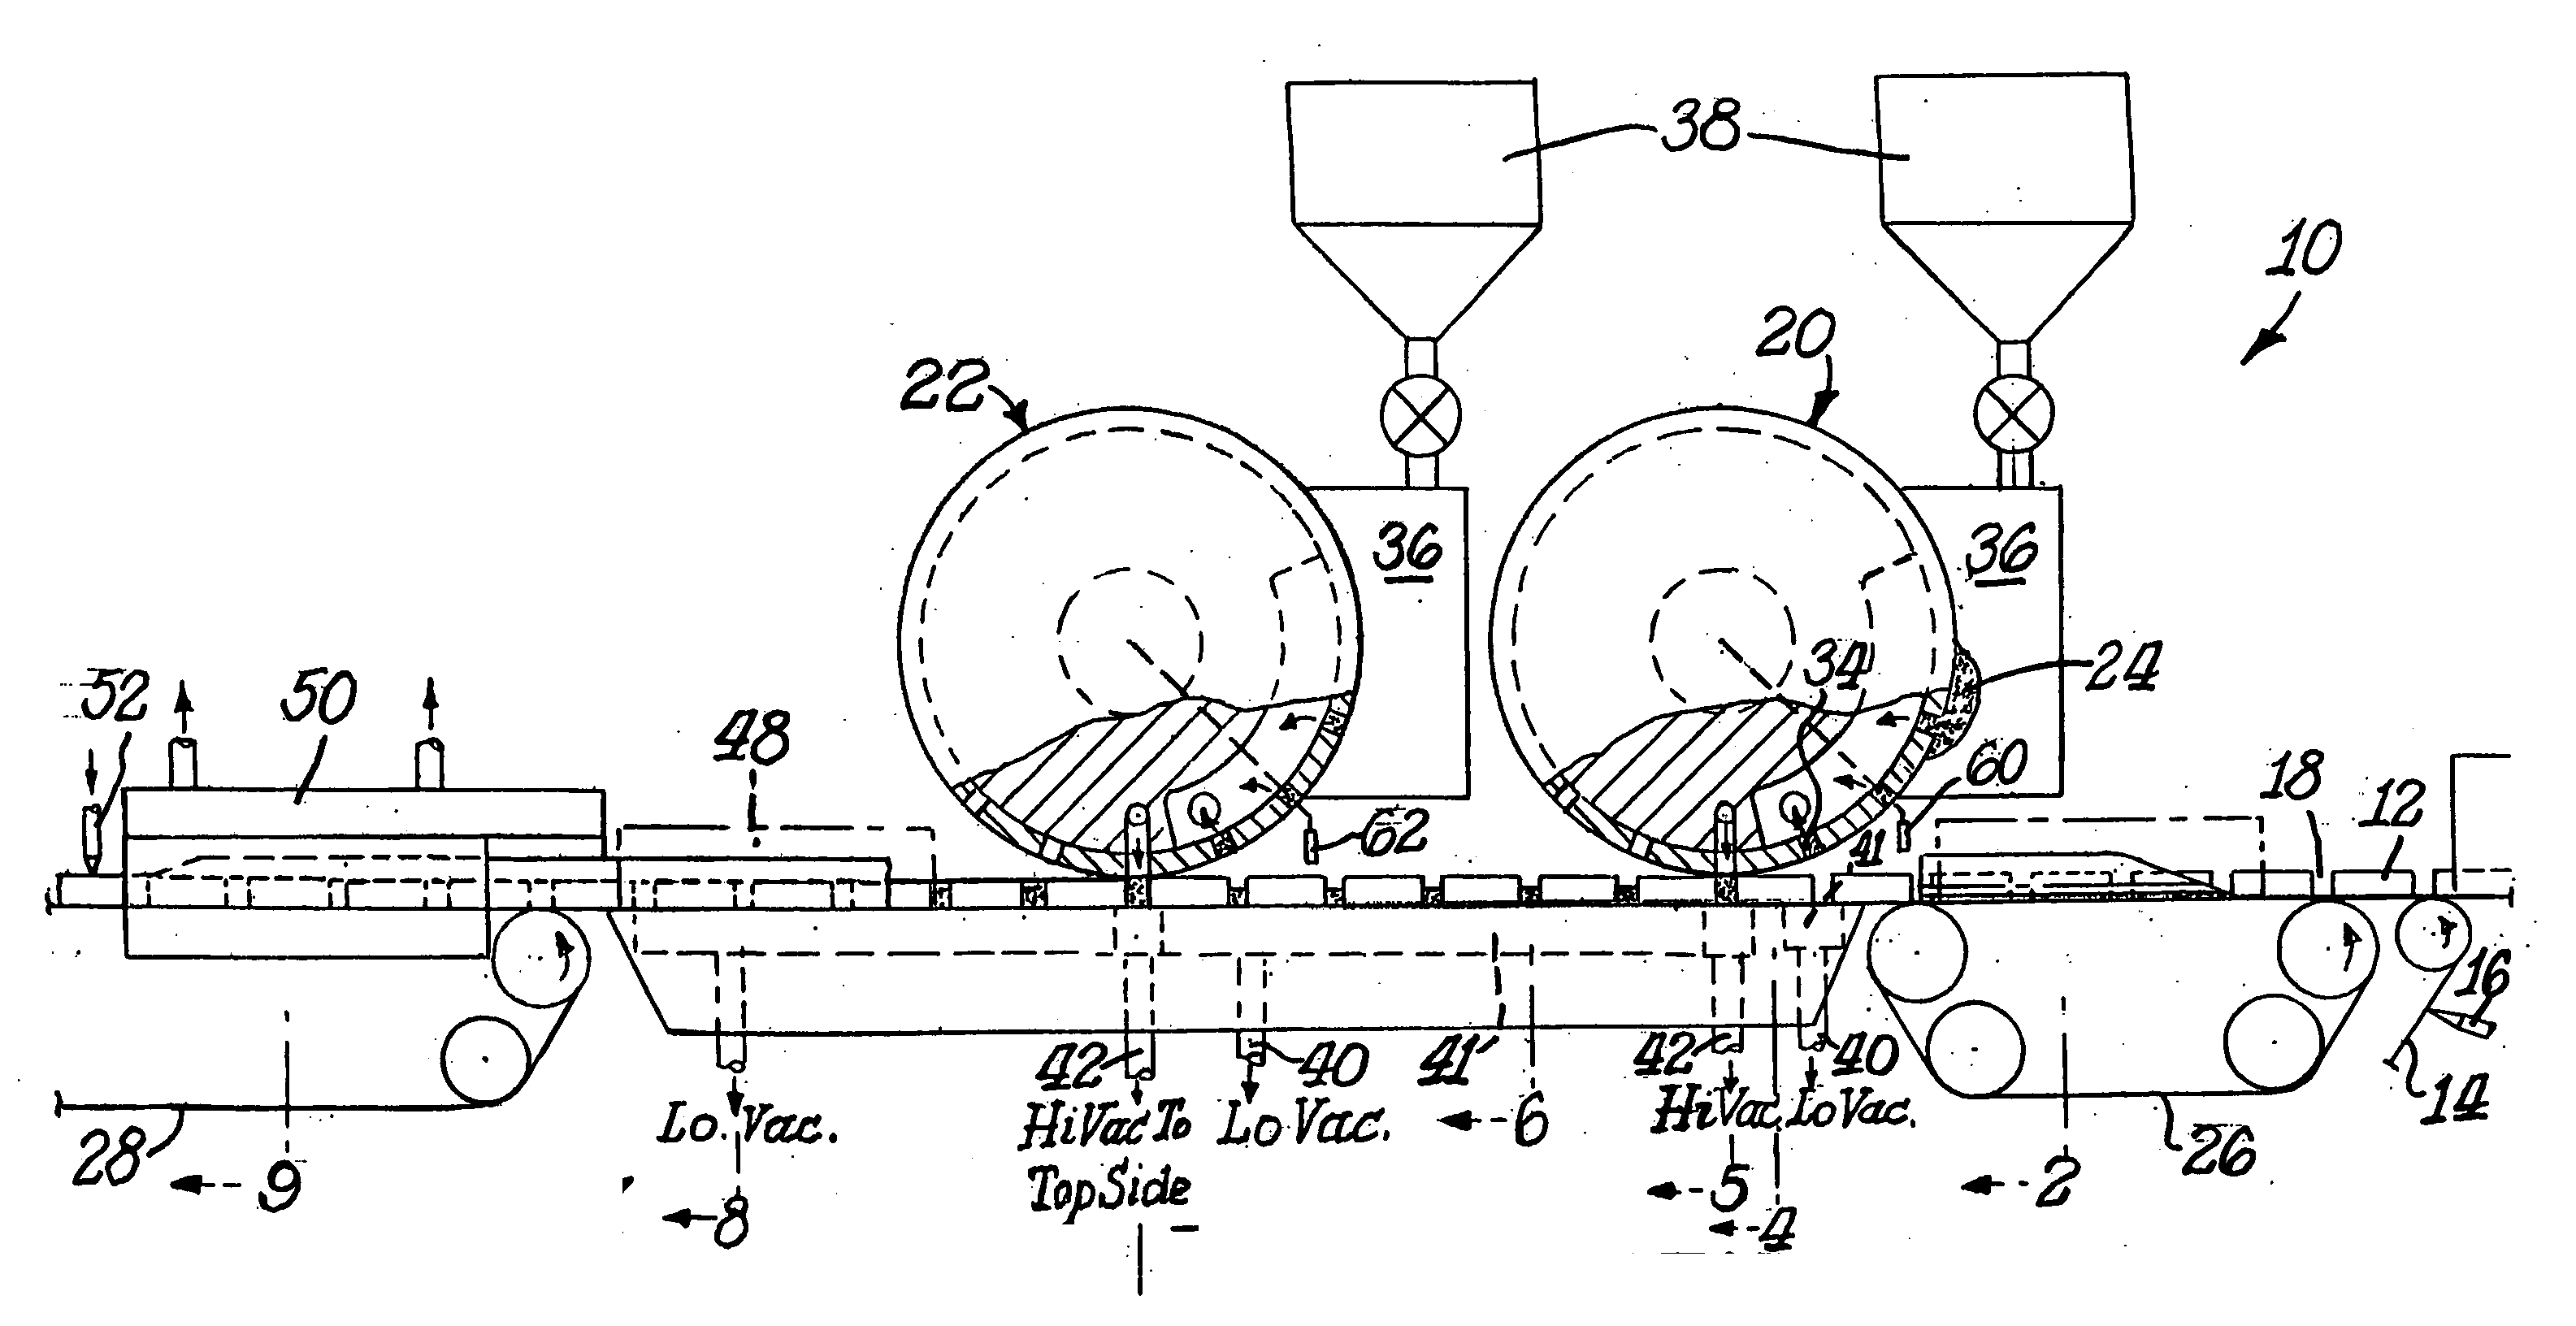 Dual station applicator wheels for filling cavities with metered amounts of particulate material